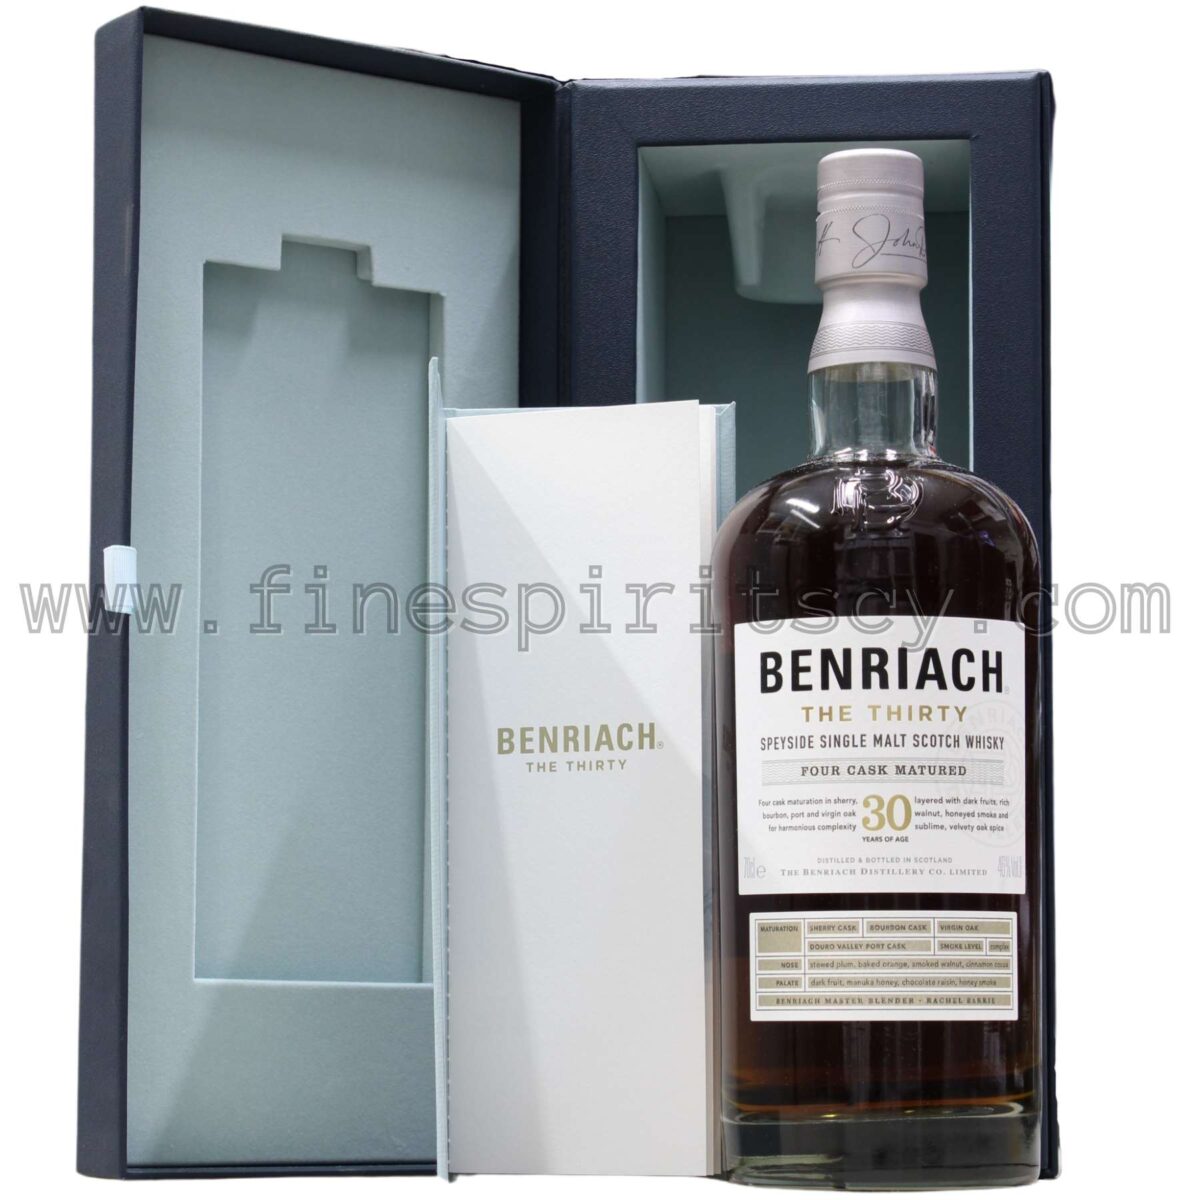 The Benriach 30Y/O Thirty Open Box Book Bottle Notes Pages